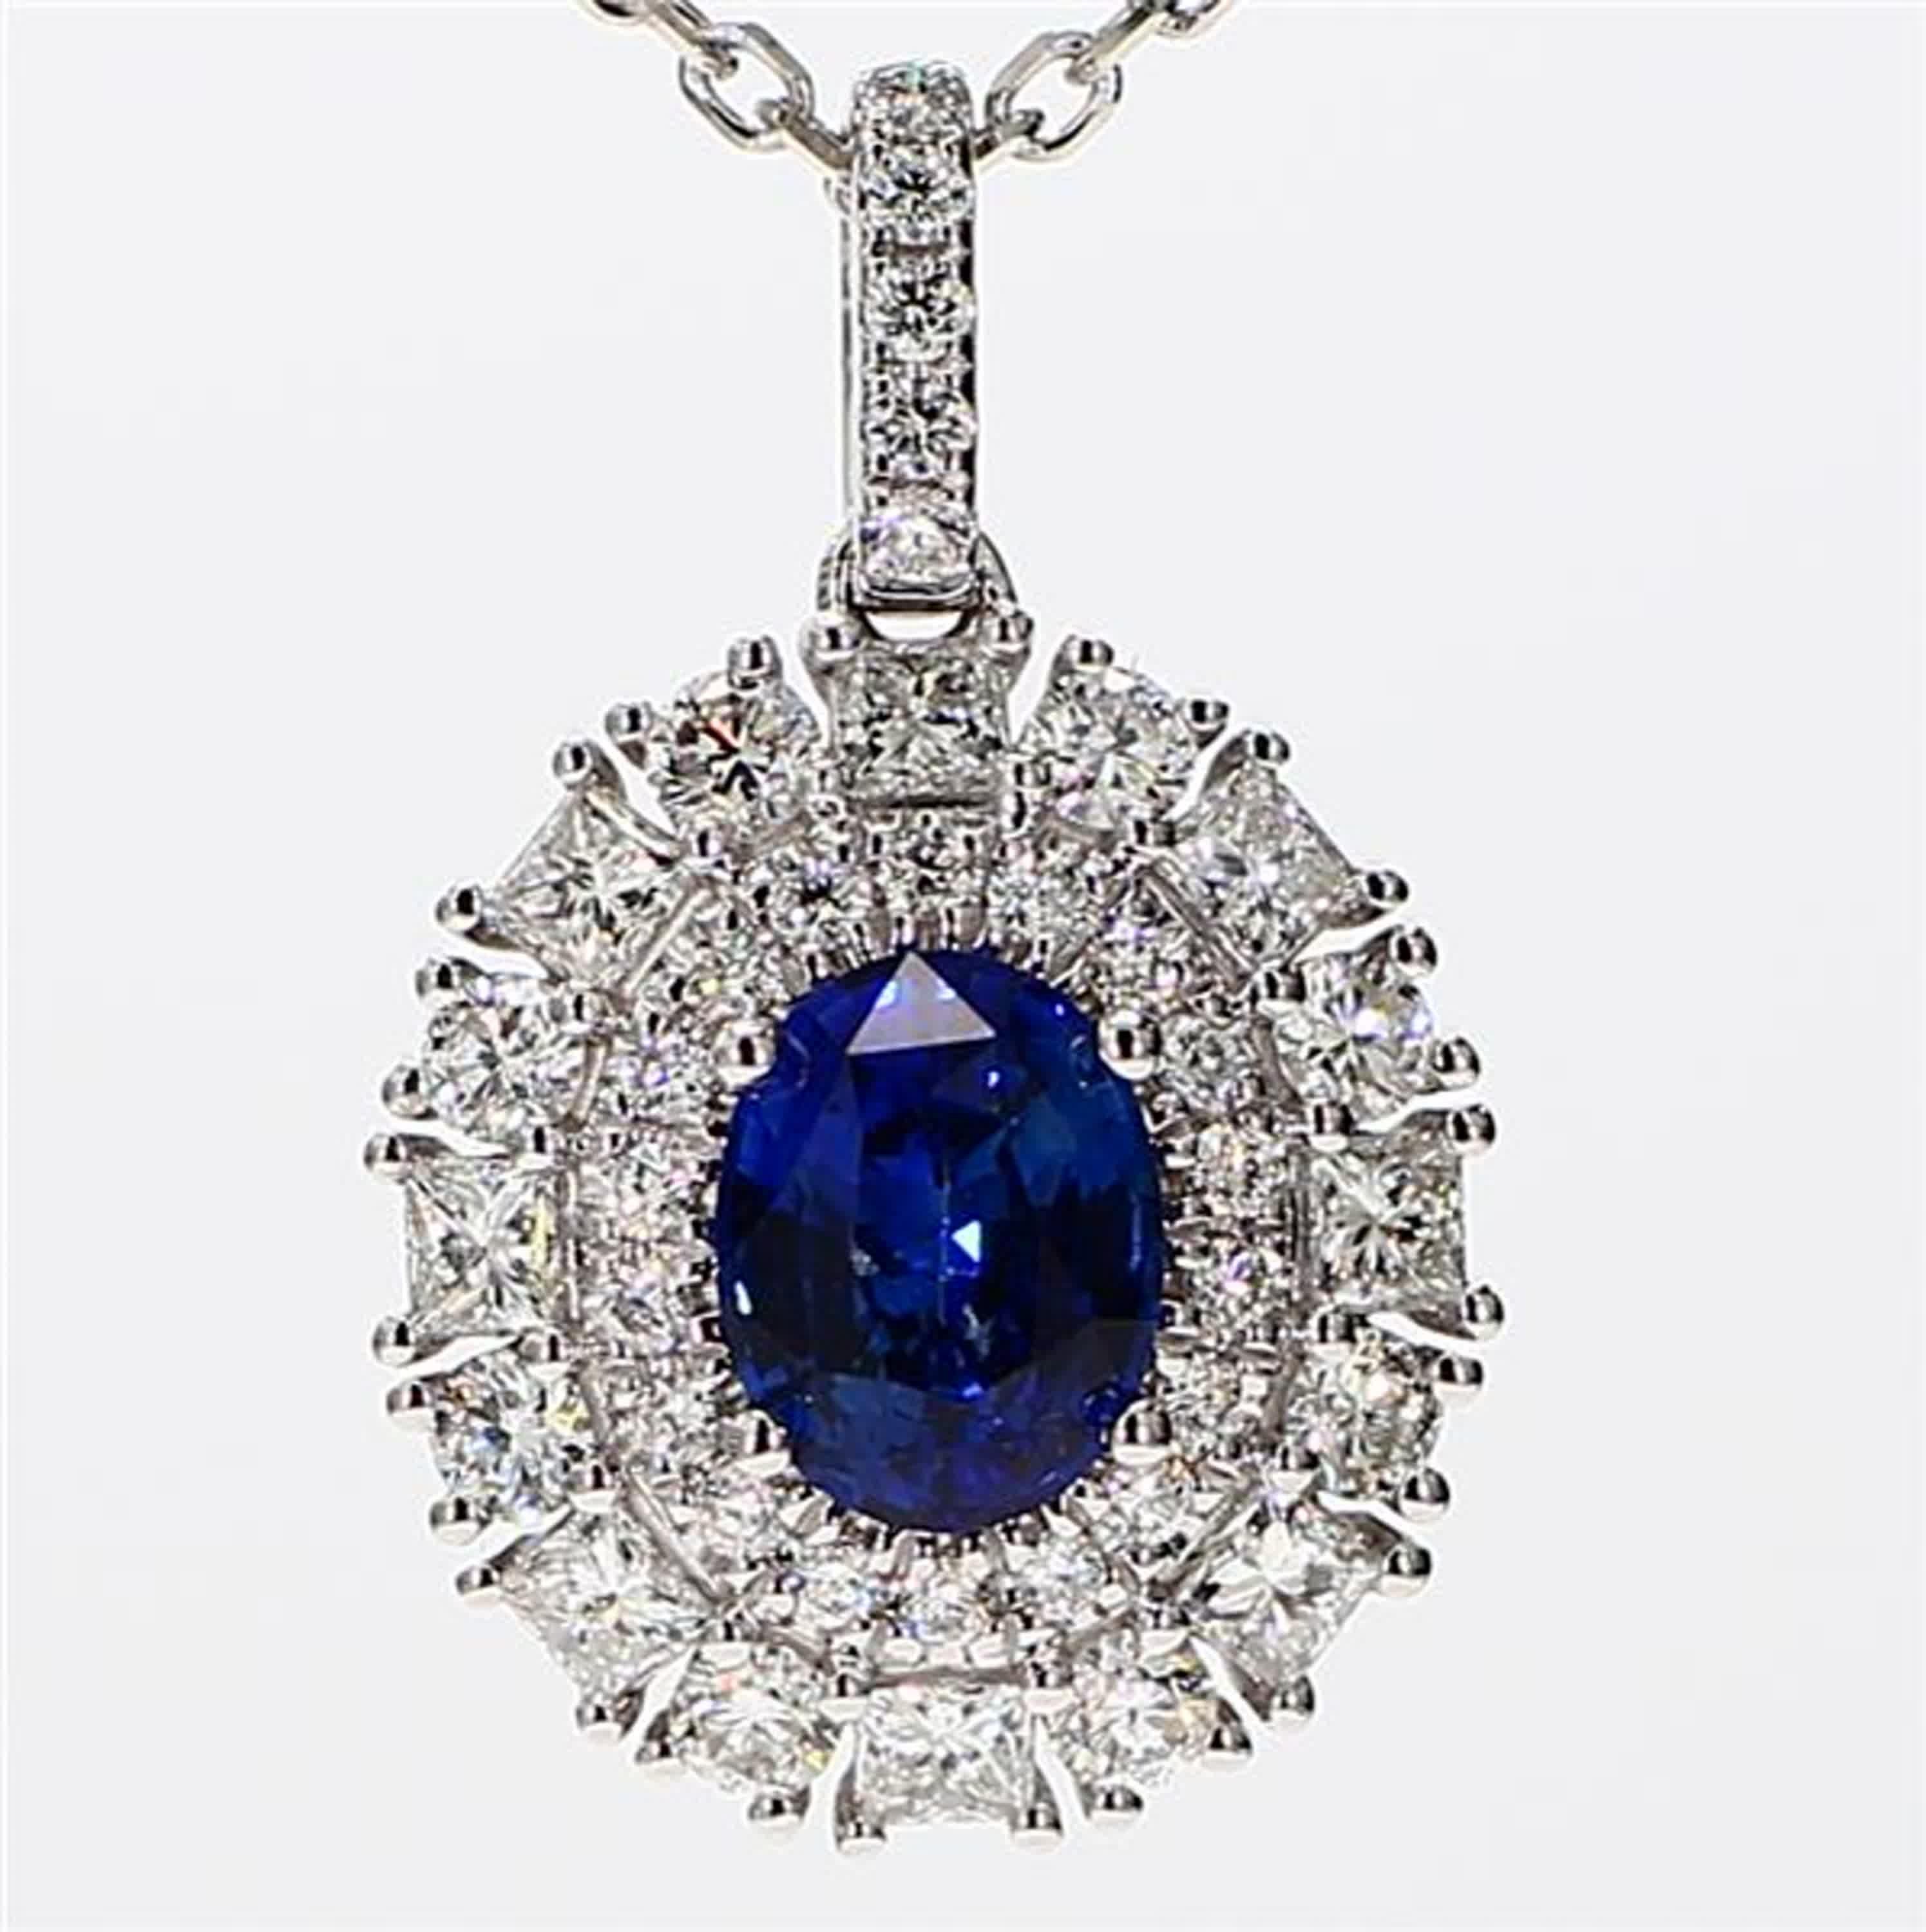 RareGemWorld's classic sapphire pendant. Mounted in a beautiful 18K White Gold setting with a natural oval cut blue sapphire. The sapphire is surrounded by natural princess cut white diamonds and natural round white diamond melee. This pendant is